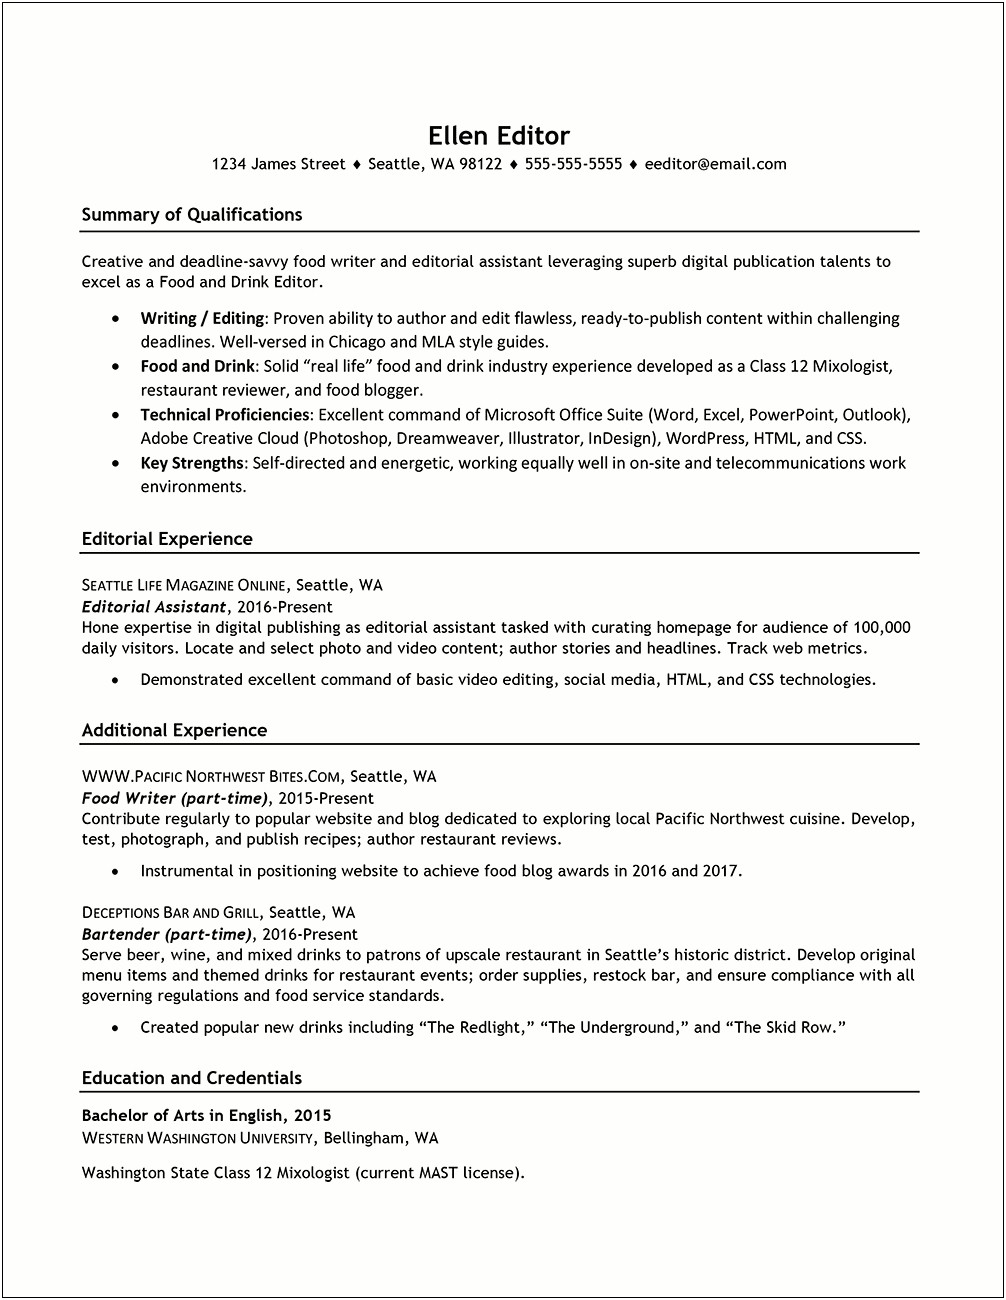 Resume With Contract Positions Examples